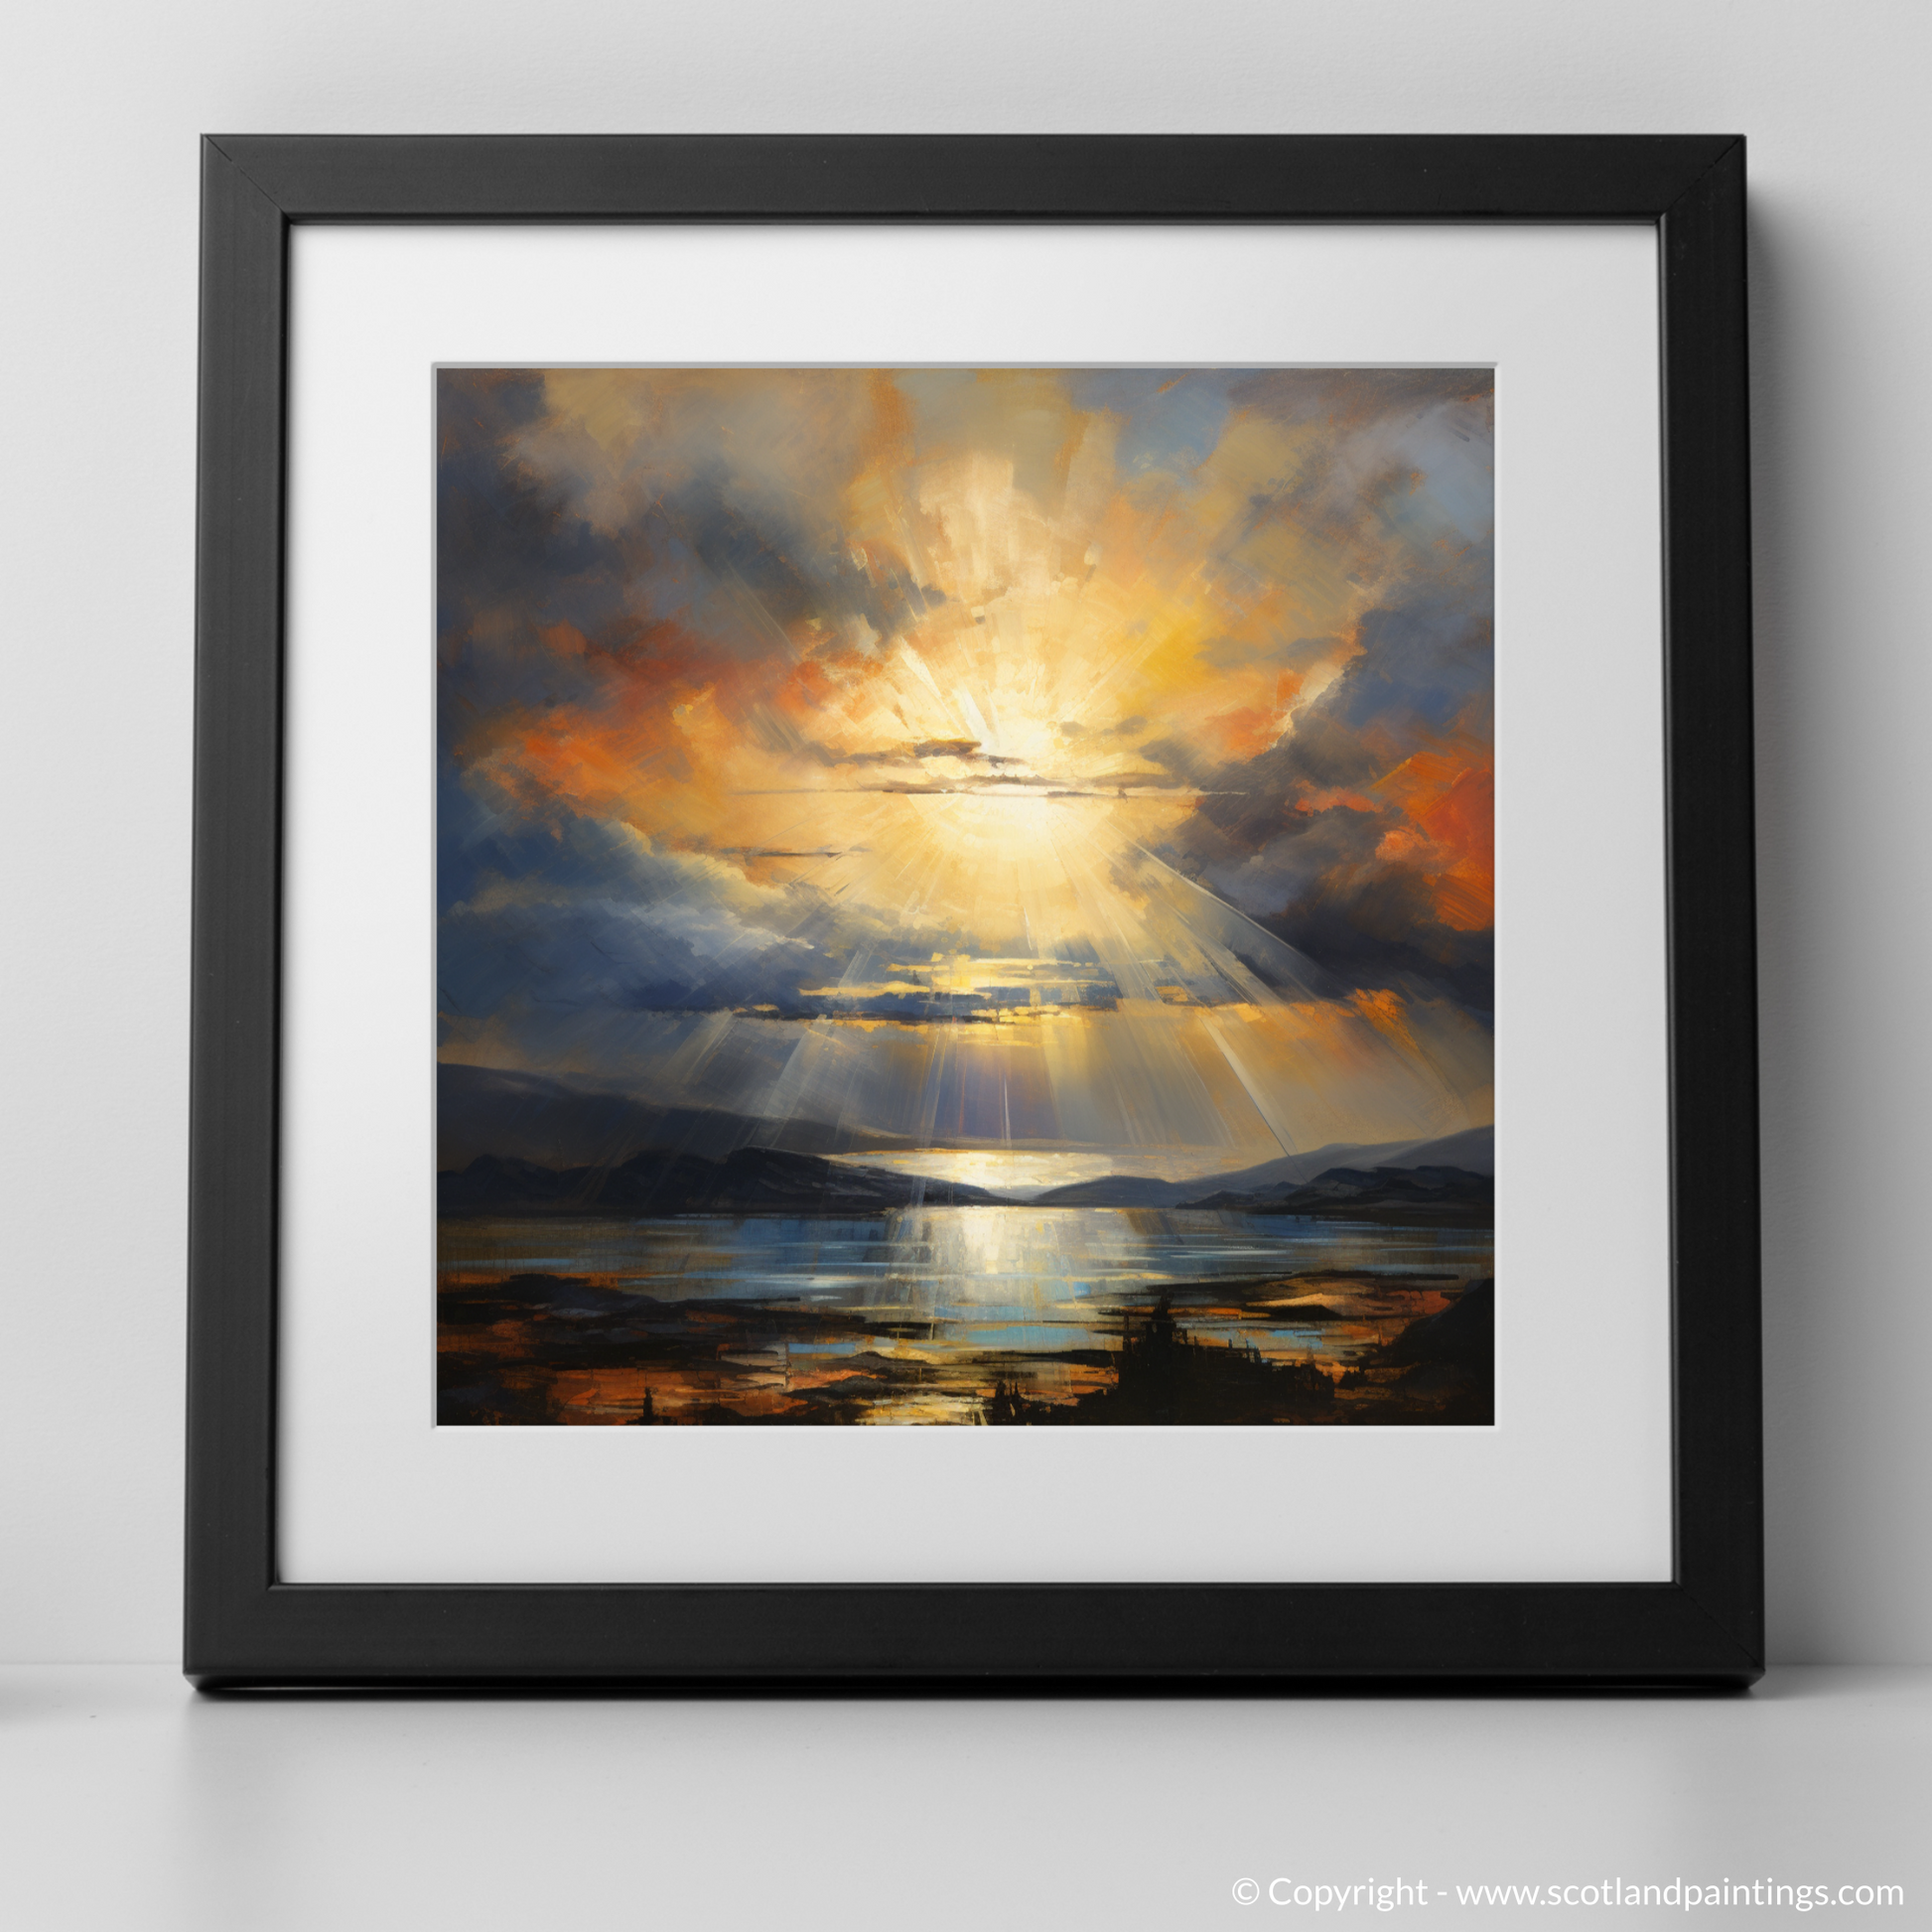 Art Print of Crepuscular rays above Loch Lomond with a black frame